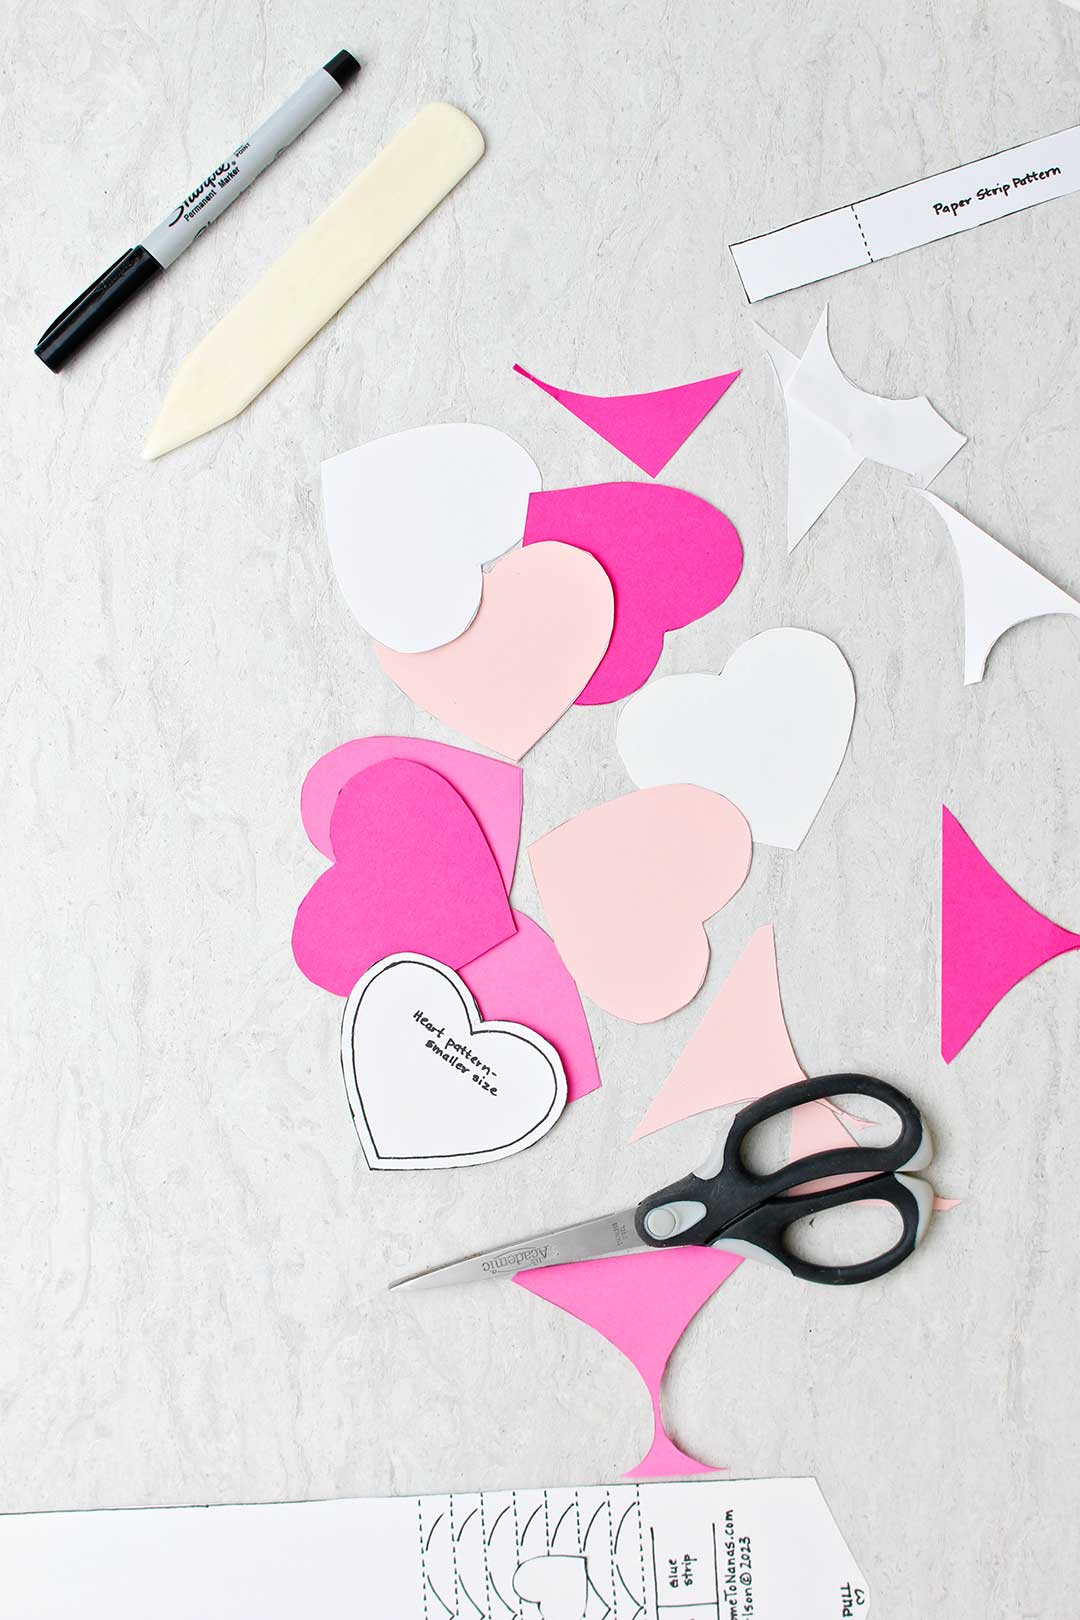 Cutouts of hearts in different shades of pink with scissors, a paper creaser, a sharpie and a template near by.